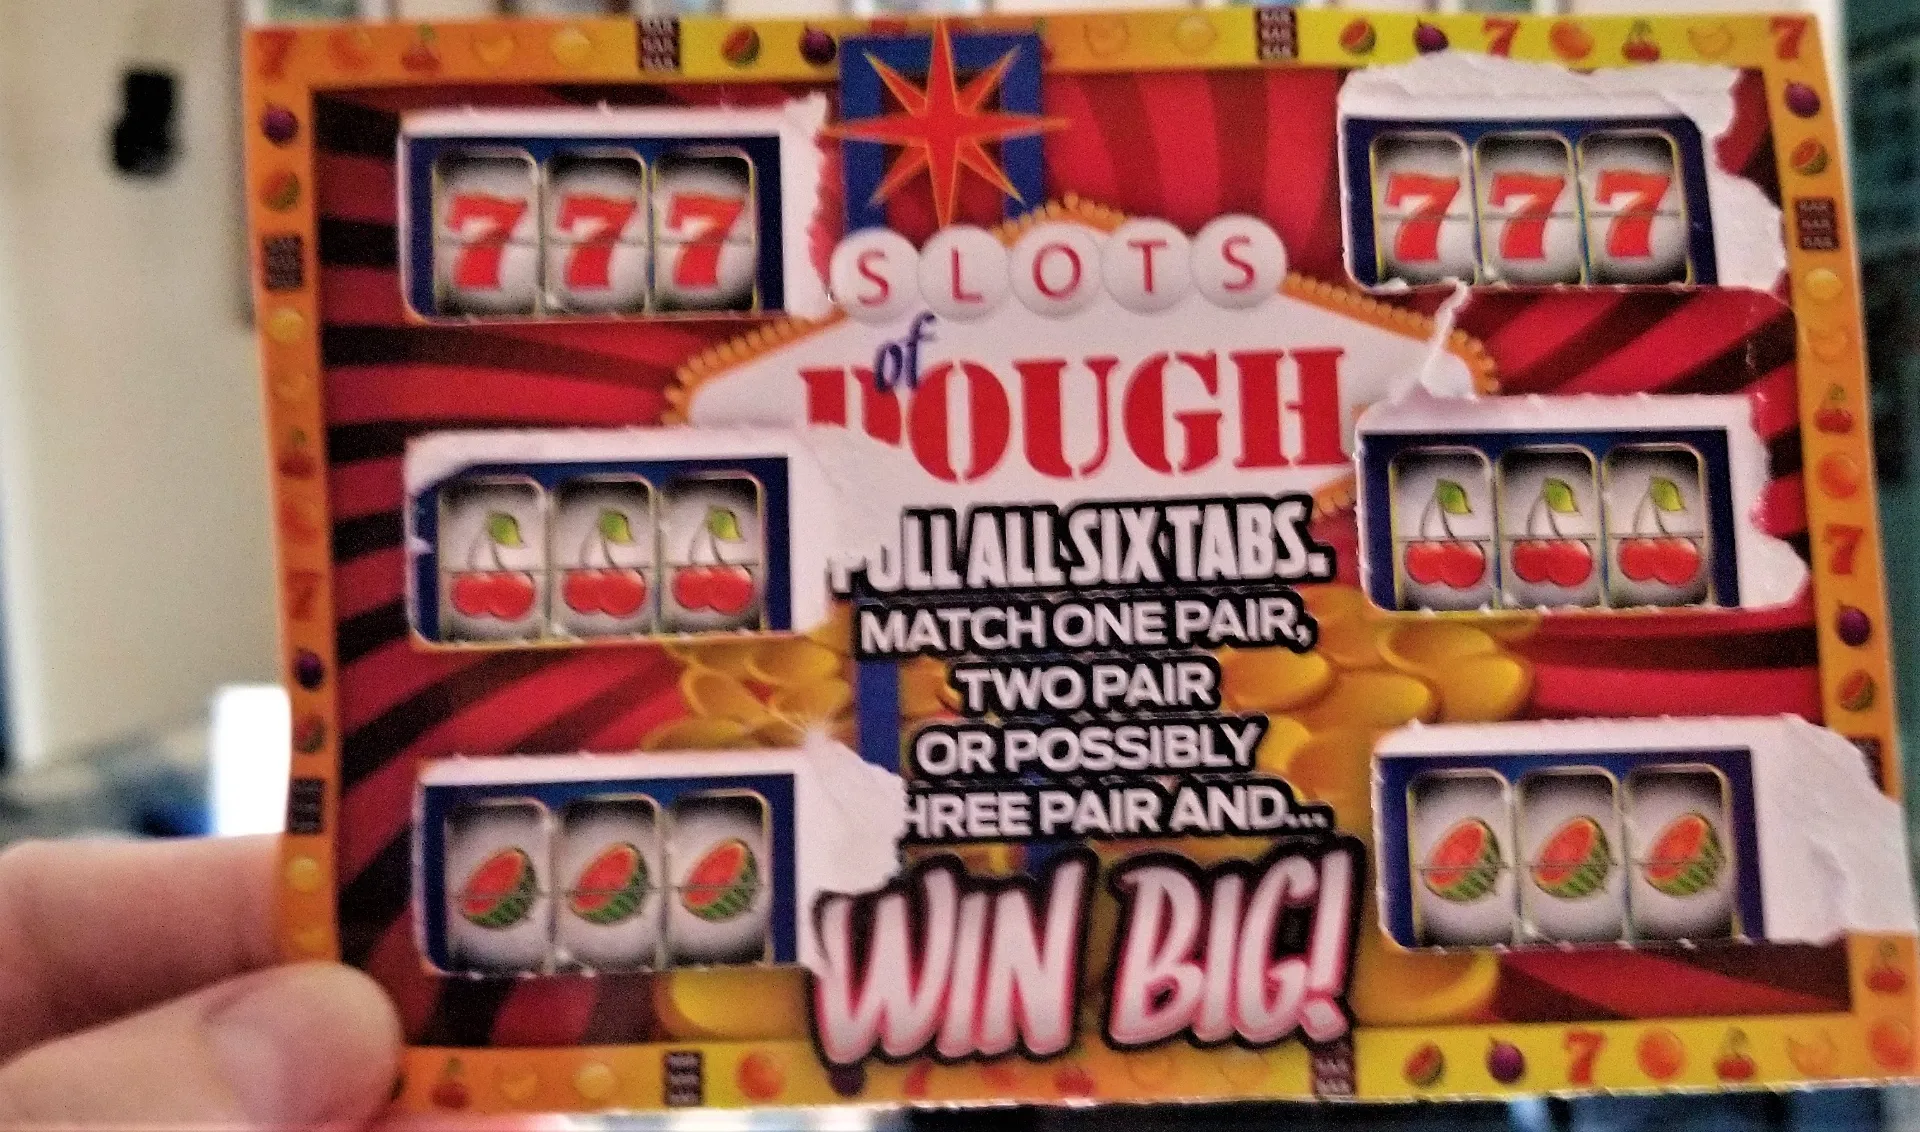 scratch cards are a total number of prizes in the world, and multiple chances of winning as an example. Sometimes it can happen that you win a prize if you are feeling lucky and have hope.